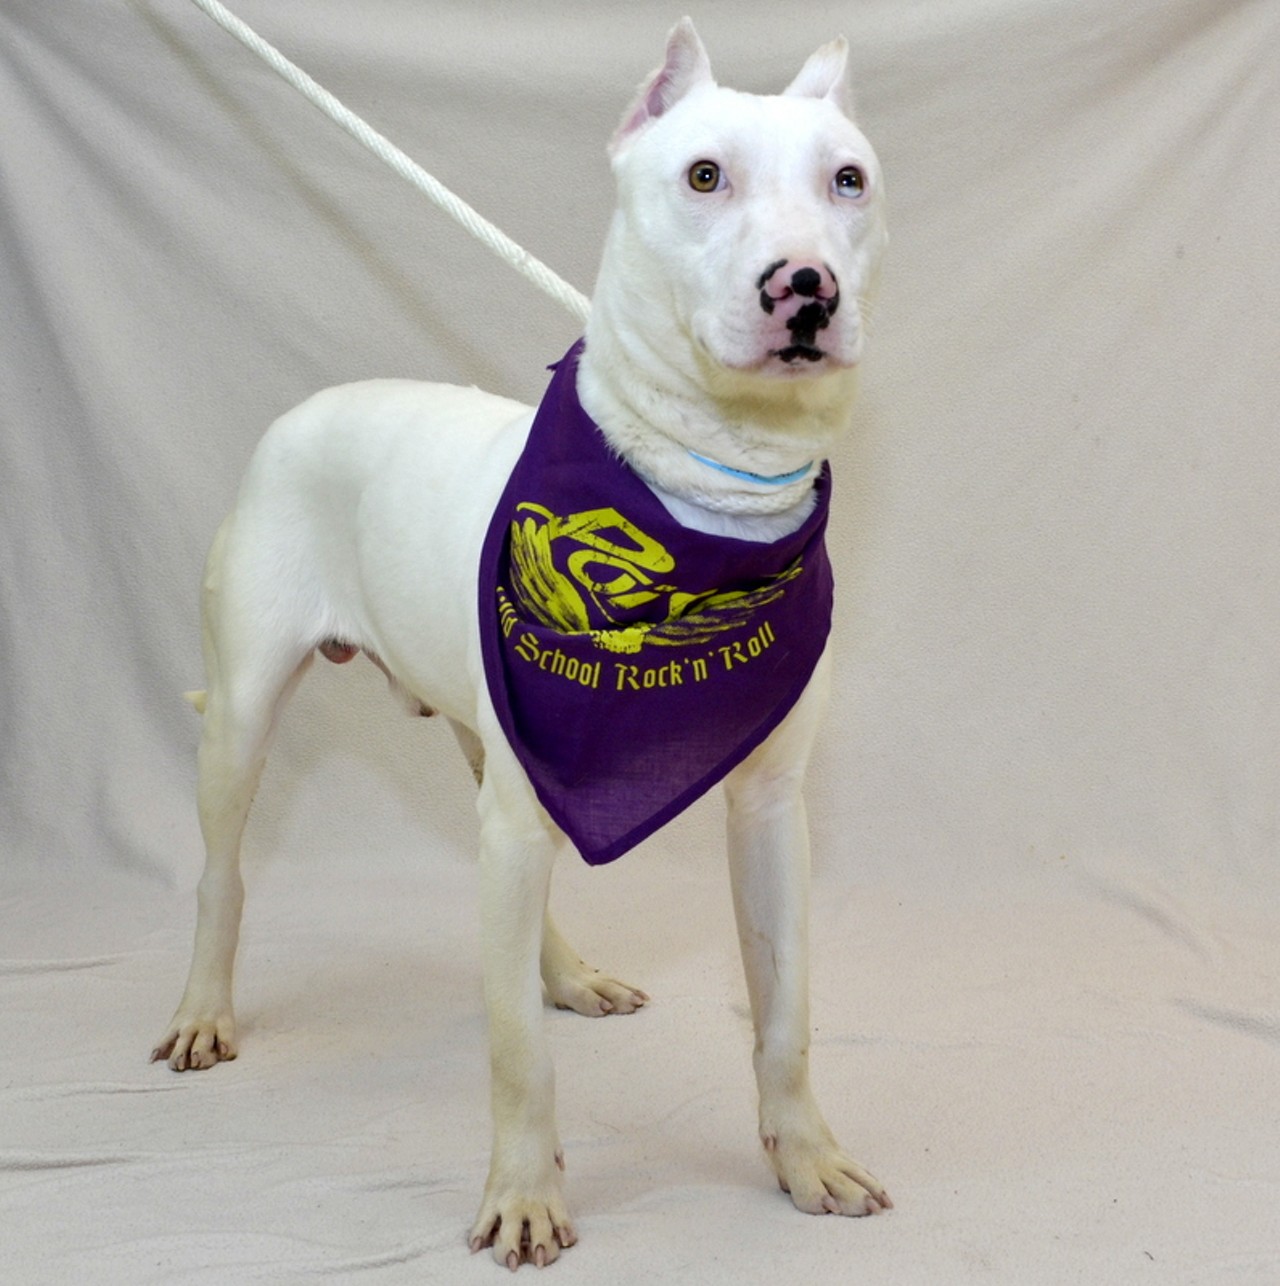 NAME: Lucius
GENDER: Male
BREED: Bull Terrier-Siberian Husky mix
AGE: 2 years
WEIGHT: 34 pounds
SPECIAL CONSIDERATIONS: Deafness
REASON I CAME TO MHS: Homeless in Belleville
LOCATION: Berman Center for Animal Care in Westland
ID NUMBER: 862741